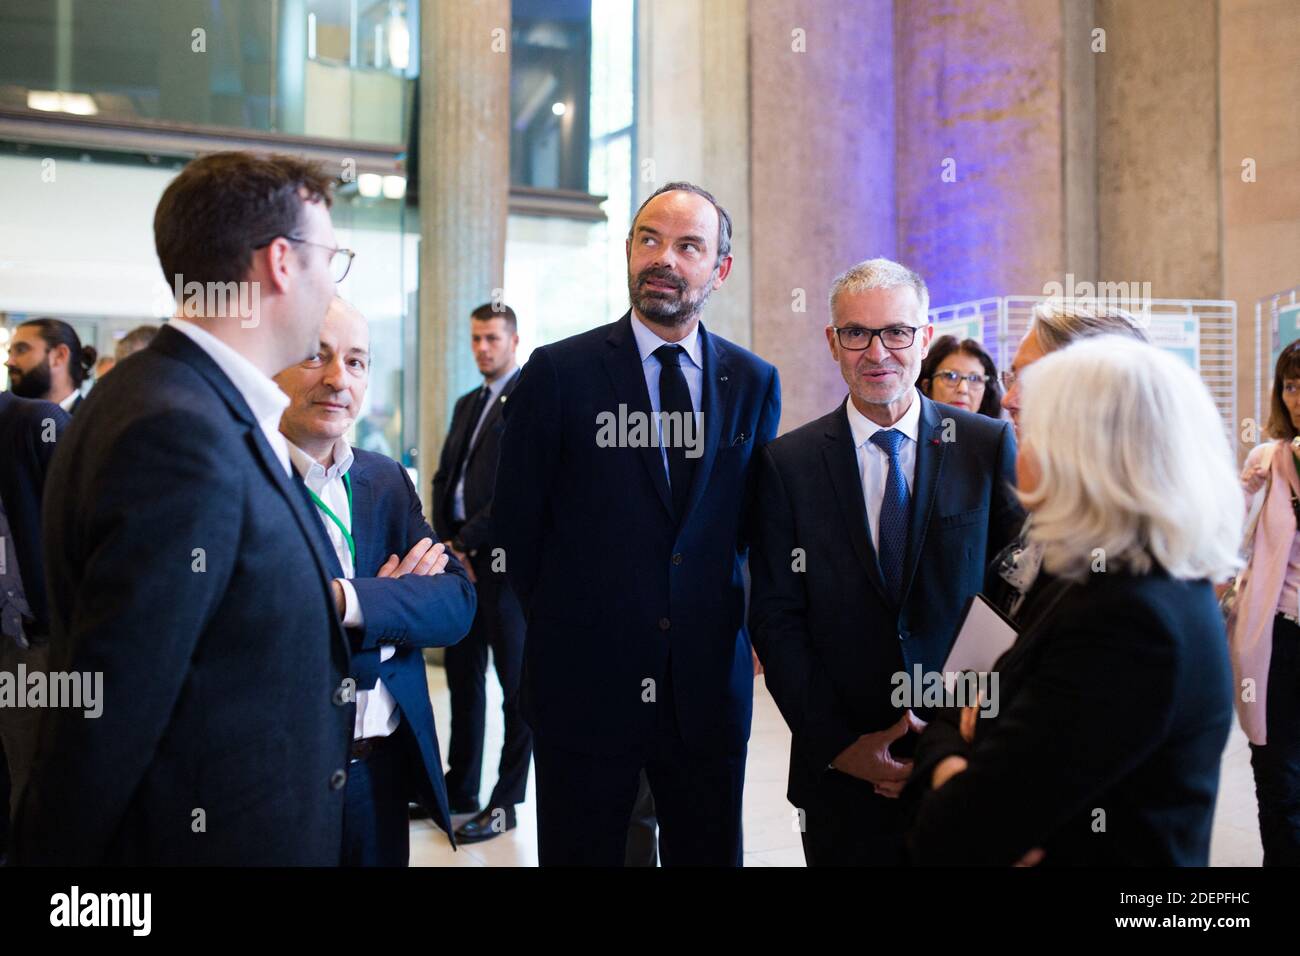 Fench Prime Minister Edouard Philippe, Economist Laurence Tubiana, French Minister for the Ecological and Inclusive Transition Elisabeth Borne, president of the CESE Patrick Bernasconi and Thierry Pech arrive at the Citizens' Convention for Climate held at the French Conseil economique, social et environnemental (CESE - Economic, Social and Environmental Council) in Paris, 04 October 2019 Photo by Raphaël Lafargue/ABACAPRESS.COM Stock Photo